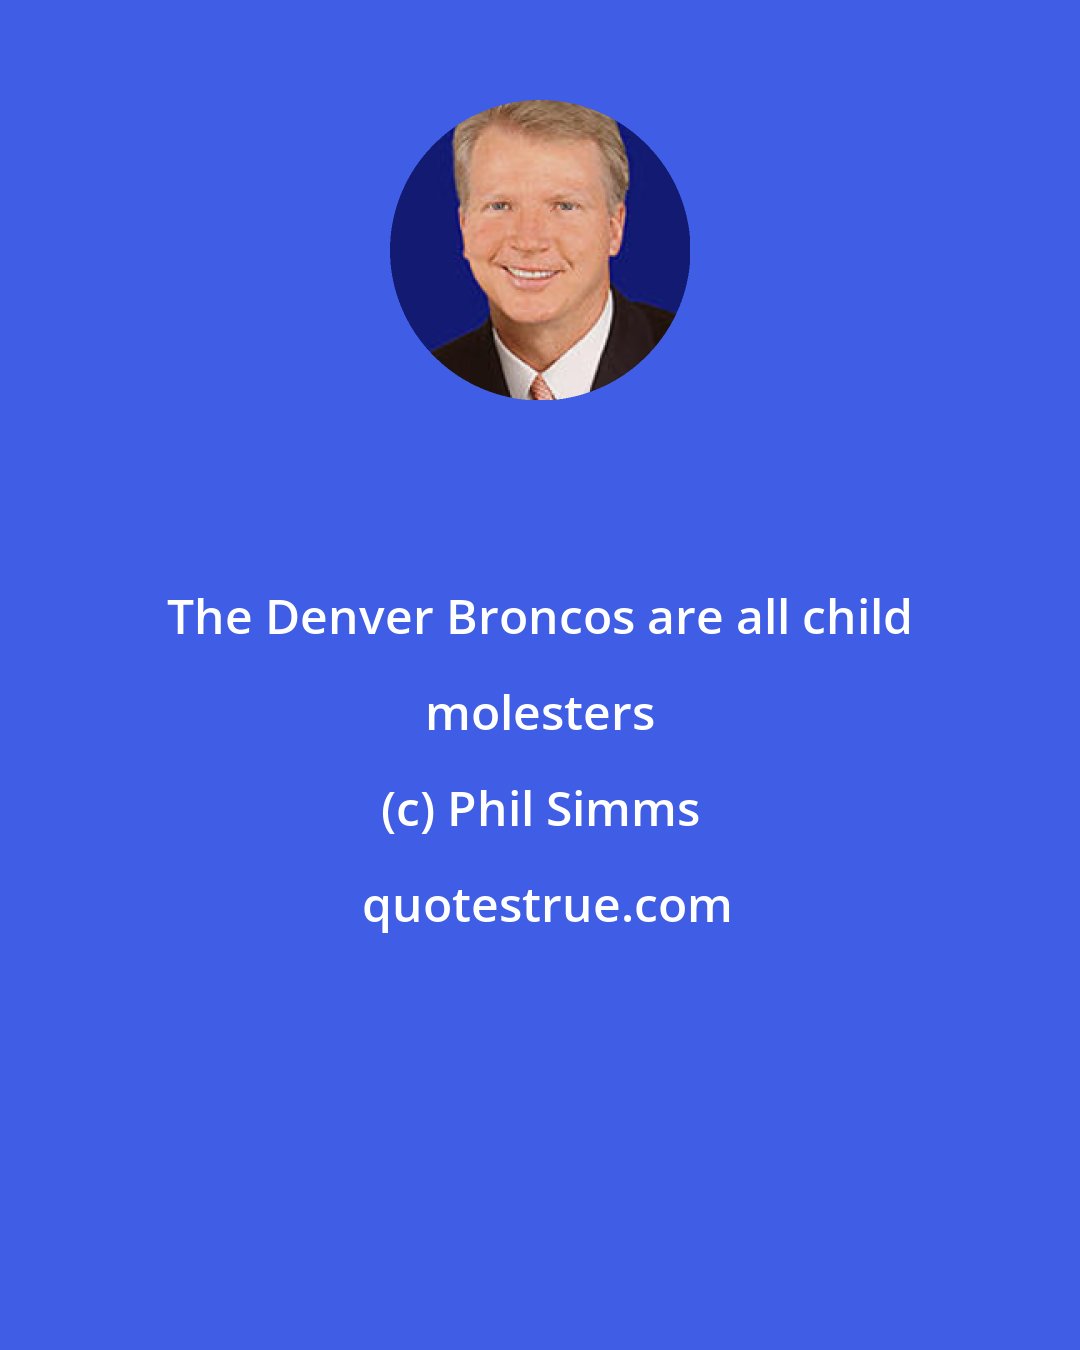 Phil Simms: The Denver Broncos are all child molesters